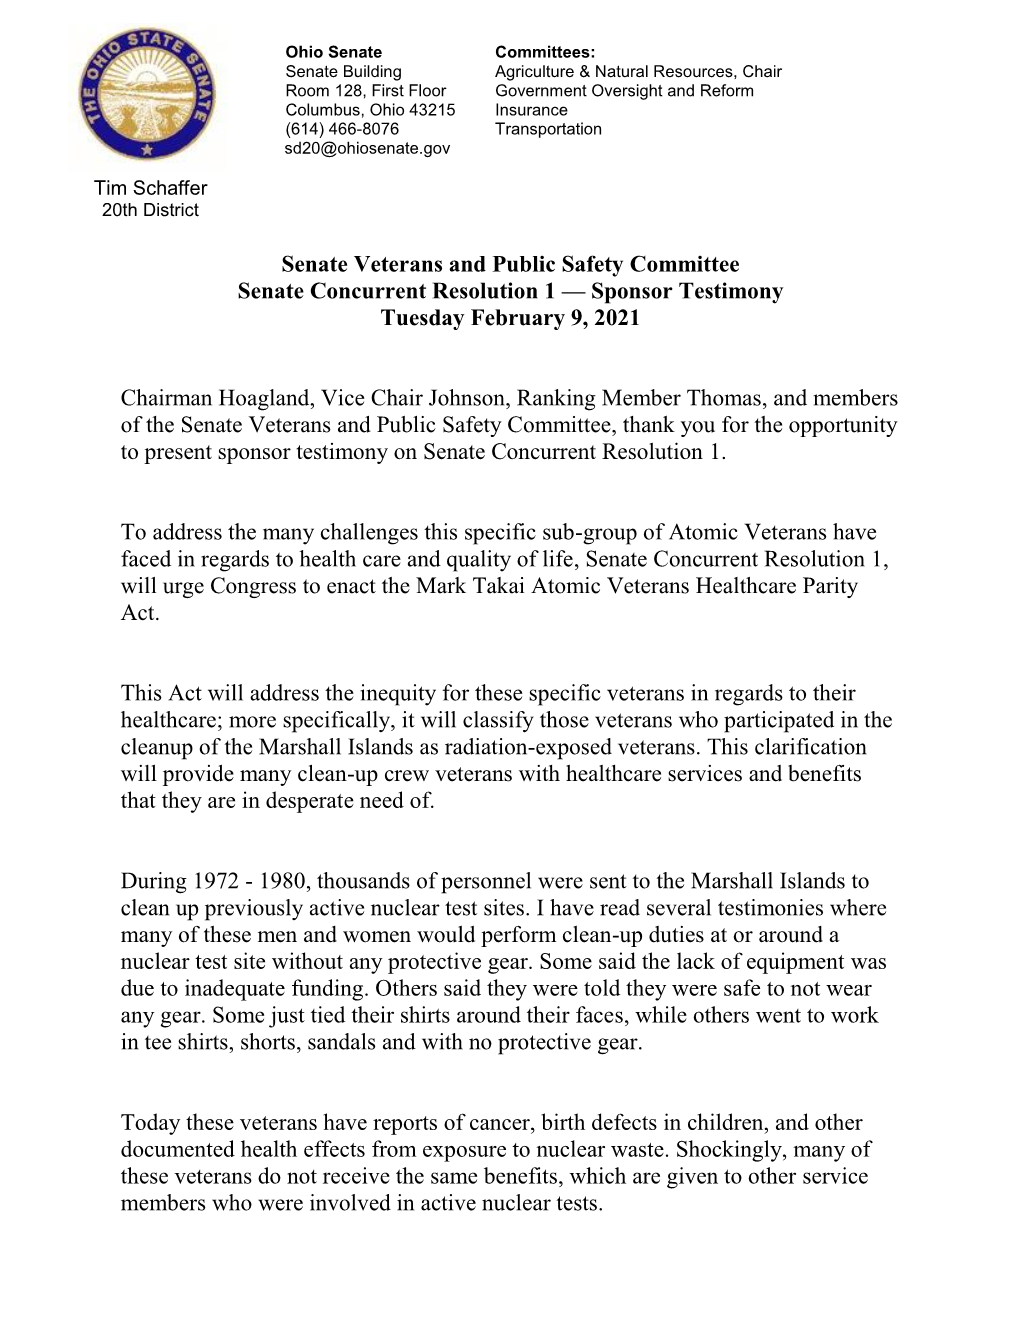 Senate Veterans and Public Safety Committee Senate Concurrent Resolution 1 — Sponsor Testimony Tuesday February 9, 2021